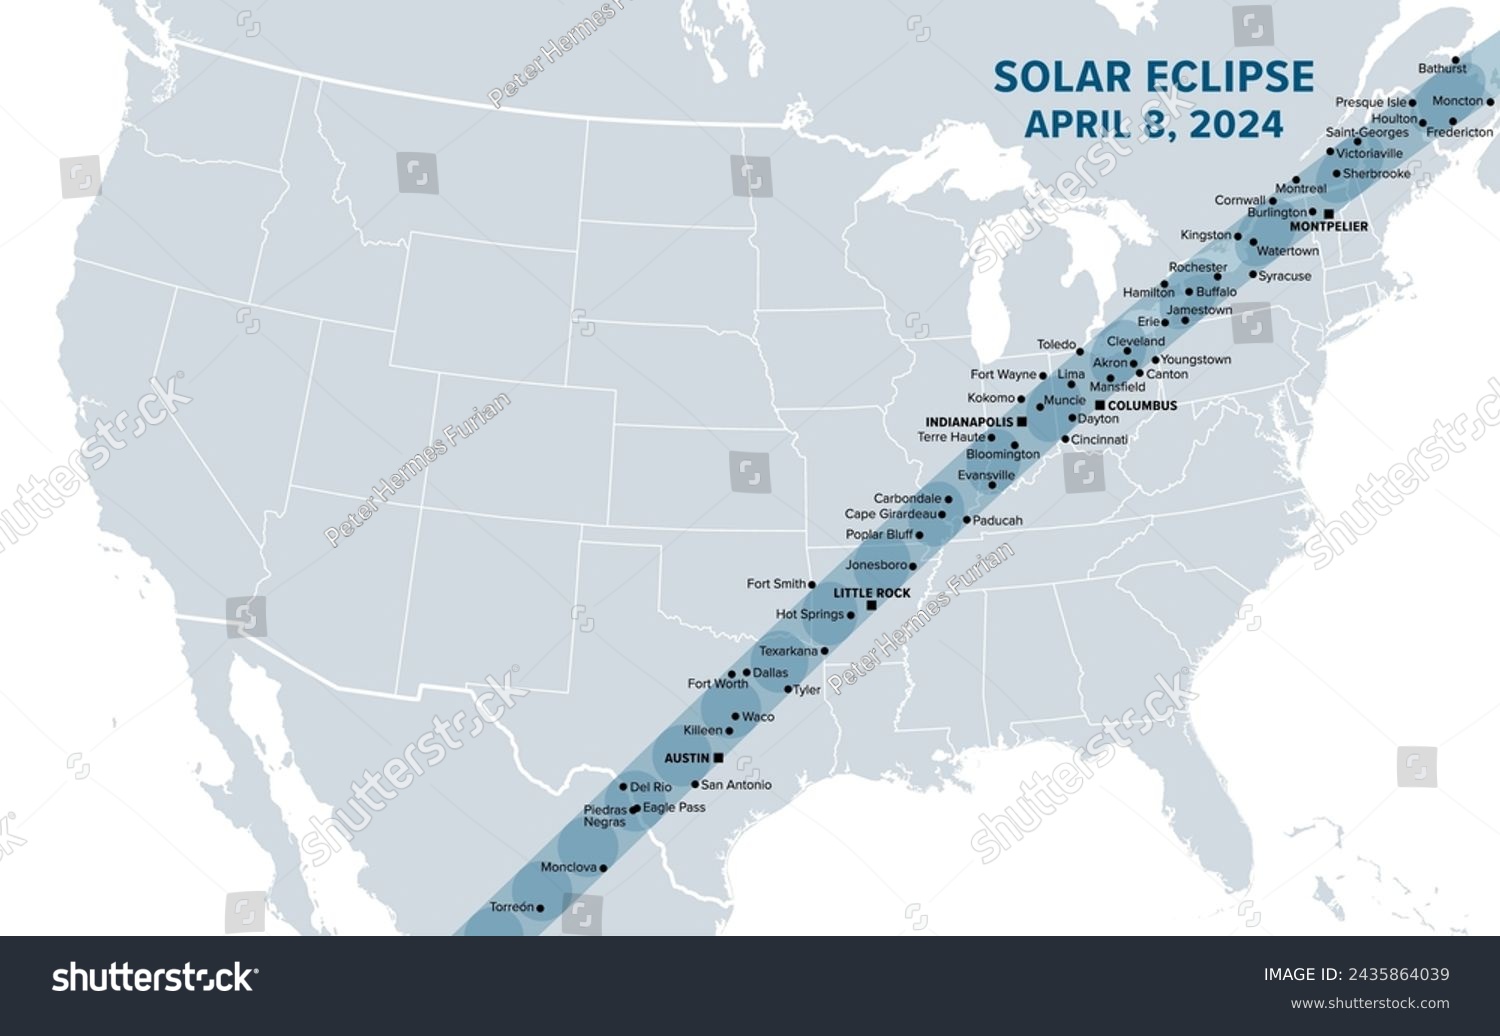 SVG of Great American Total Solar Eclipse of April 8, 2024. Political map containing names of cities inside the path of totality. Visible across North America, passing over Mexico, United States, and Canada. svg